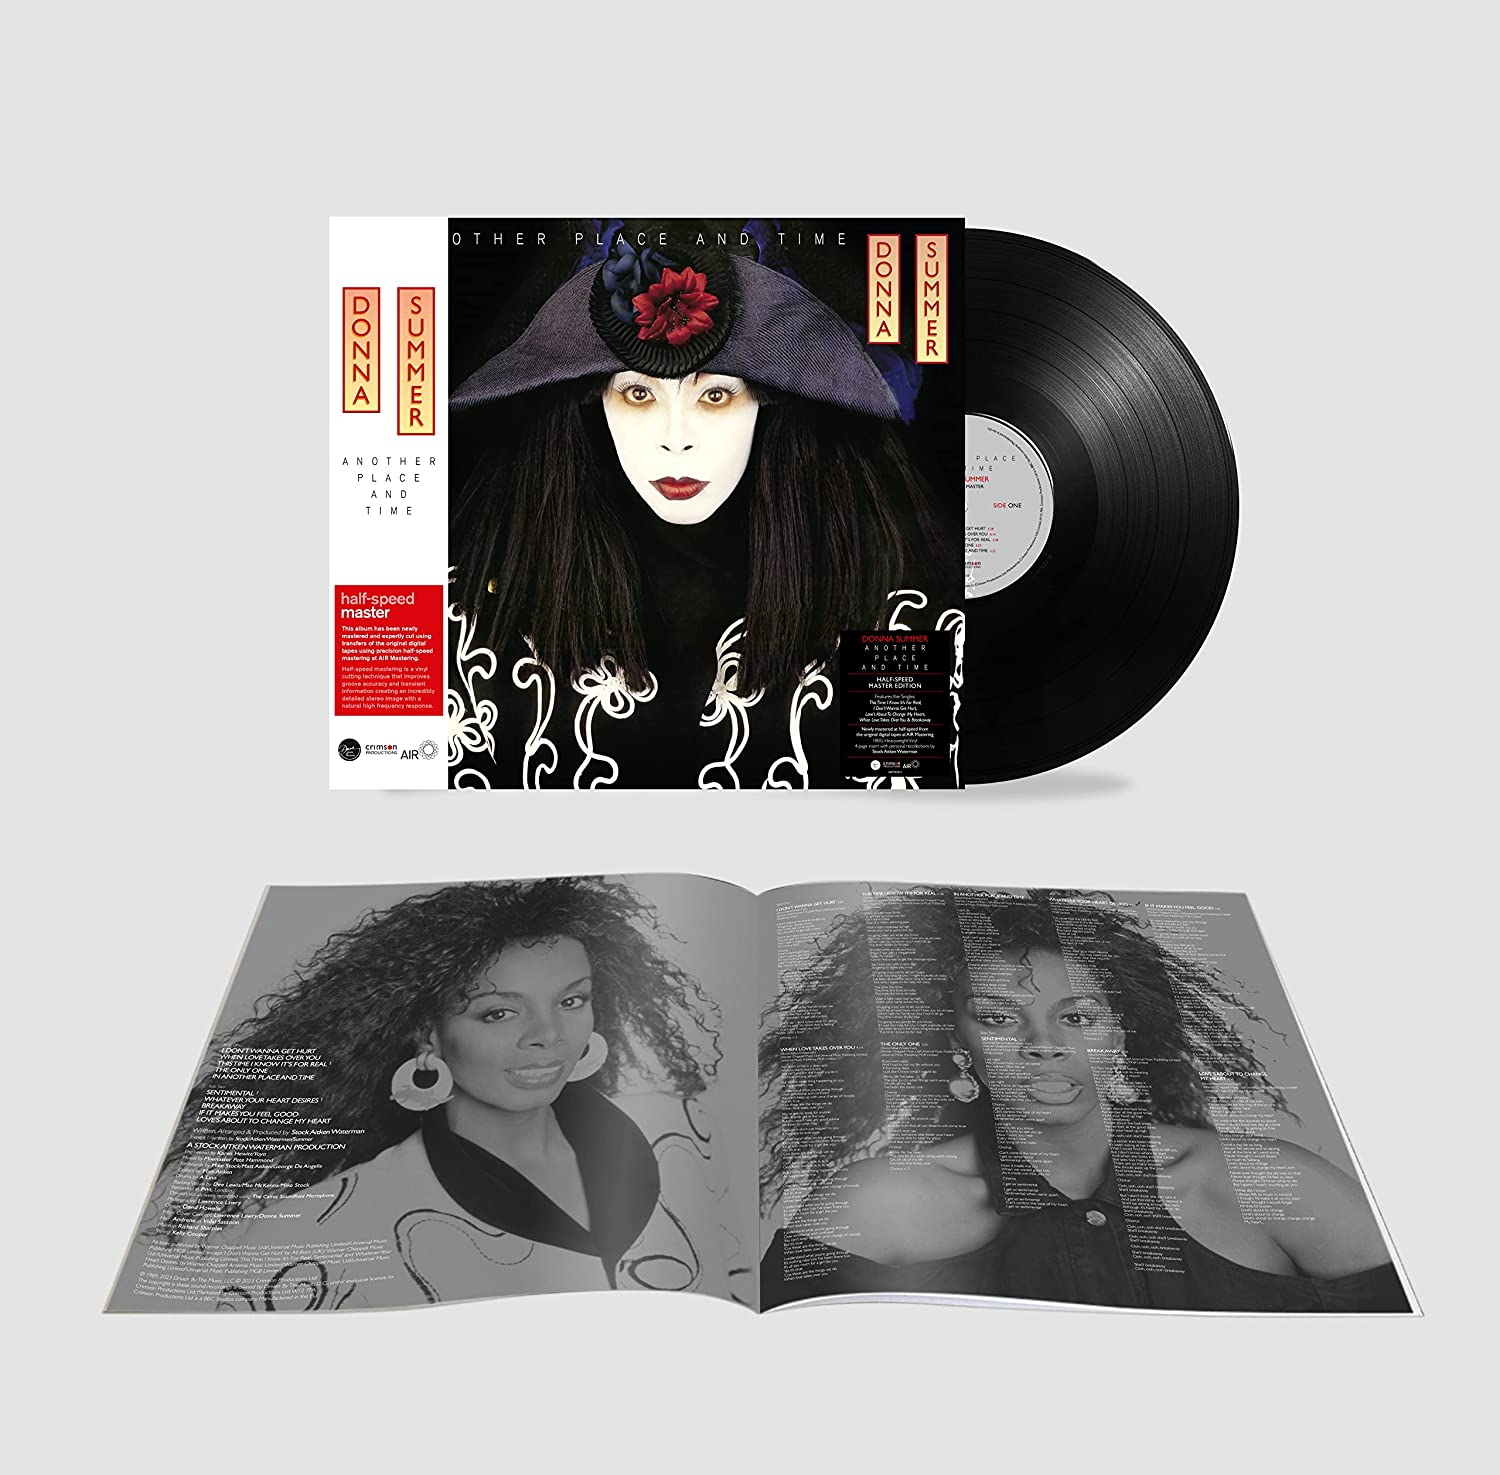 Donna Summer / Another Place and Time reissue – SuperDeluxeEdition